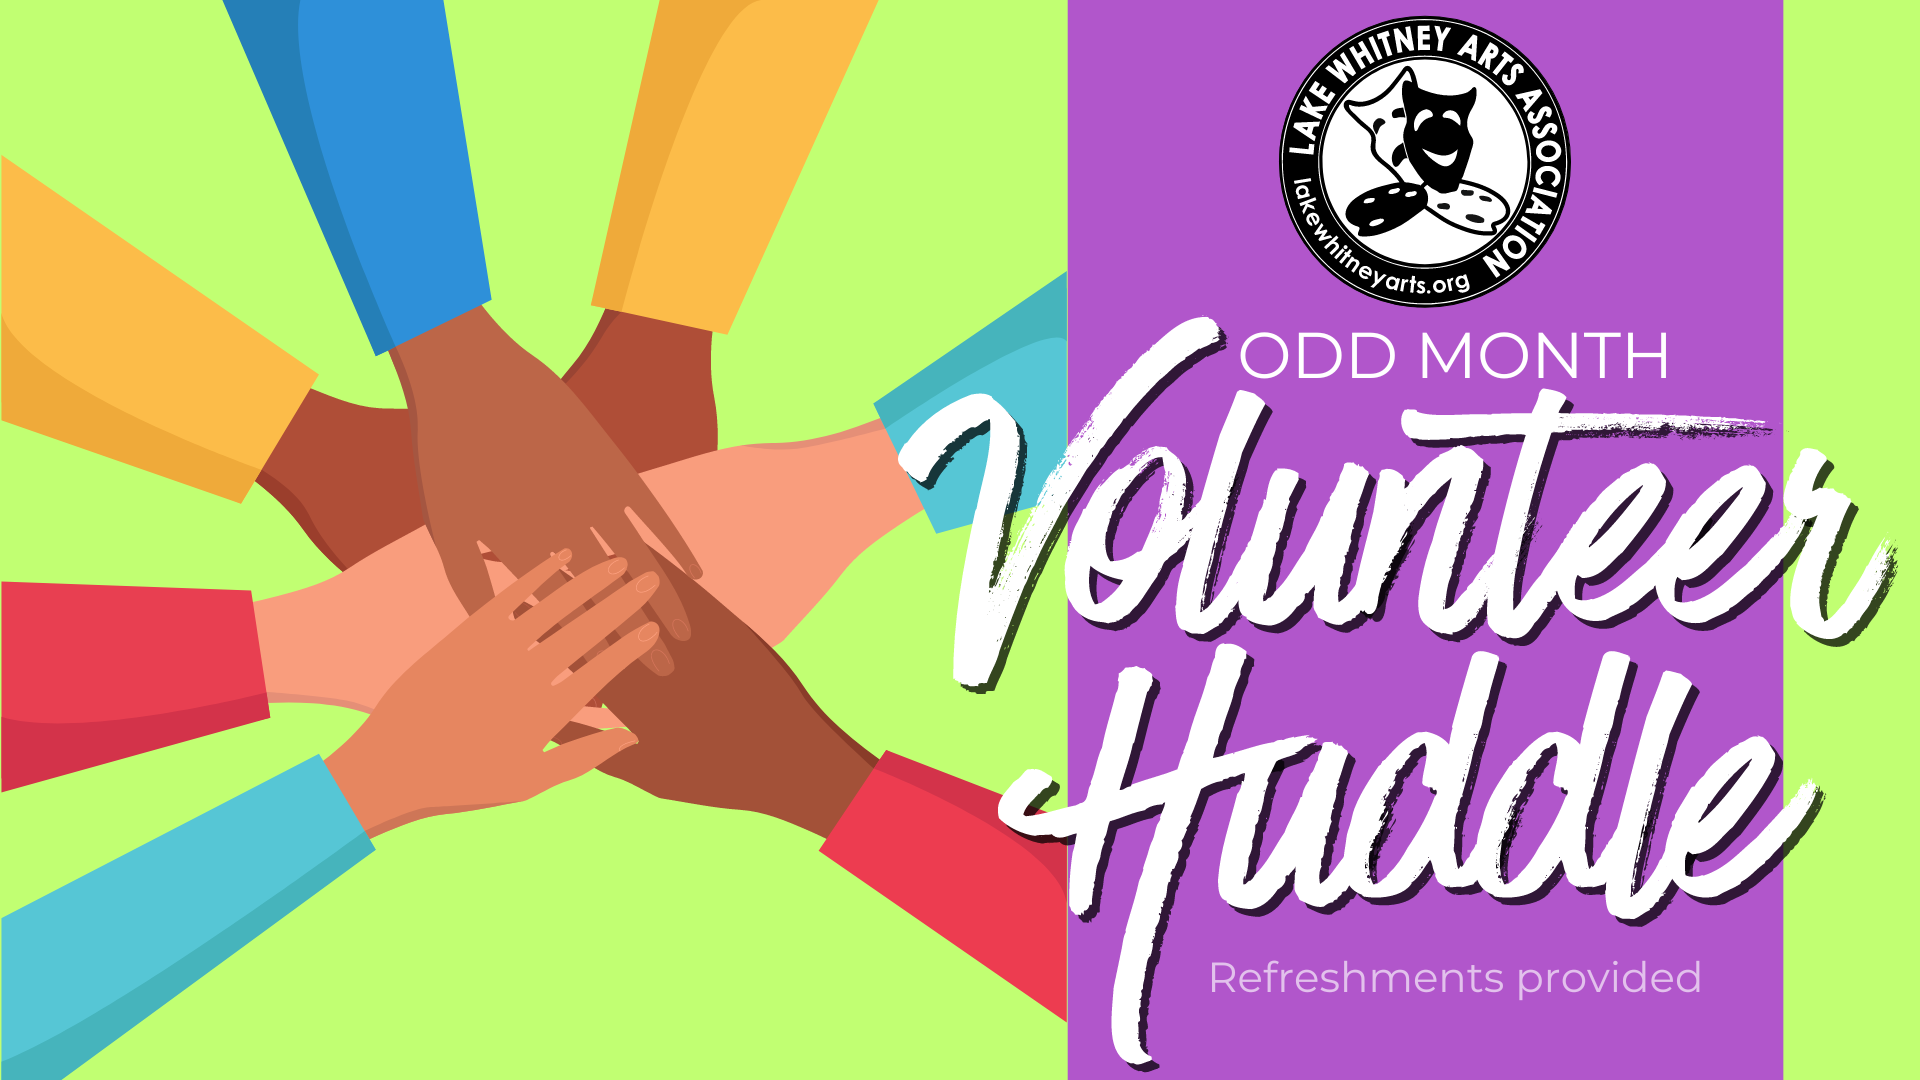 Volunteer Huddle every two months!